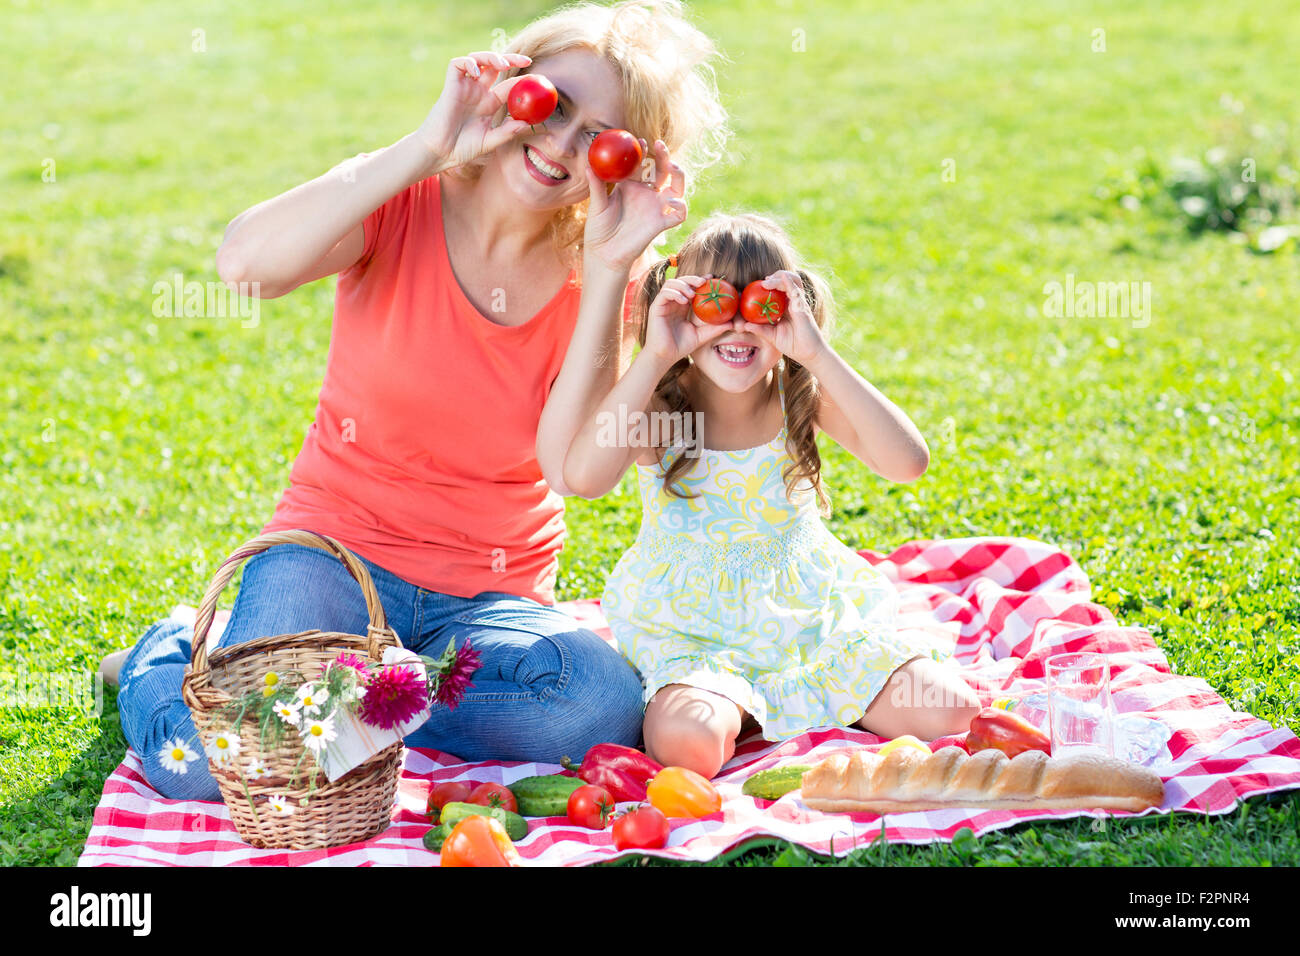 Family having fun while picnicking in the park Stock Photo